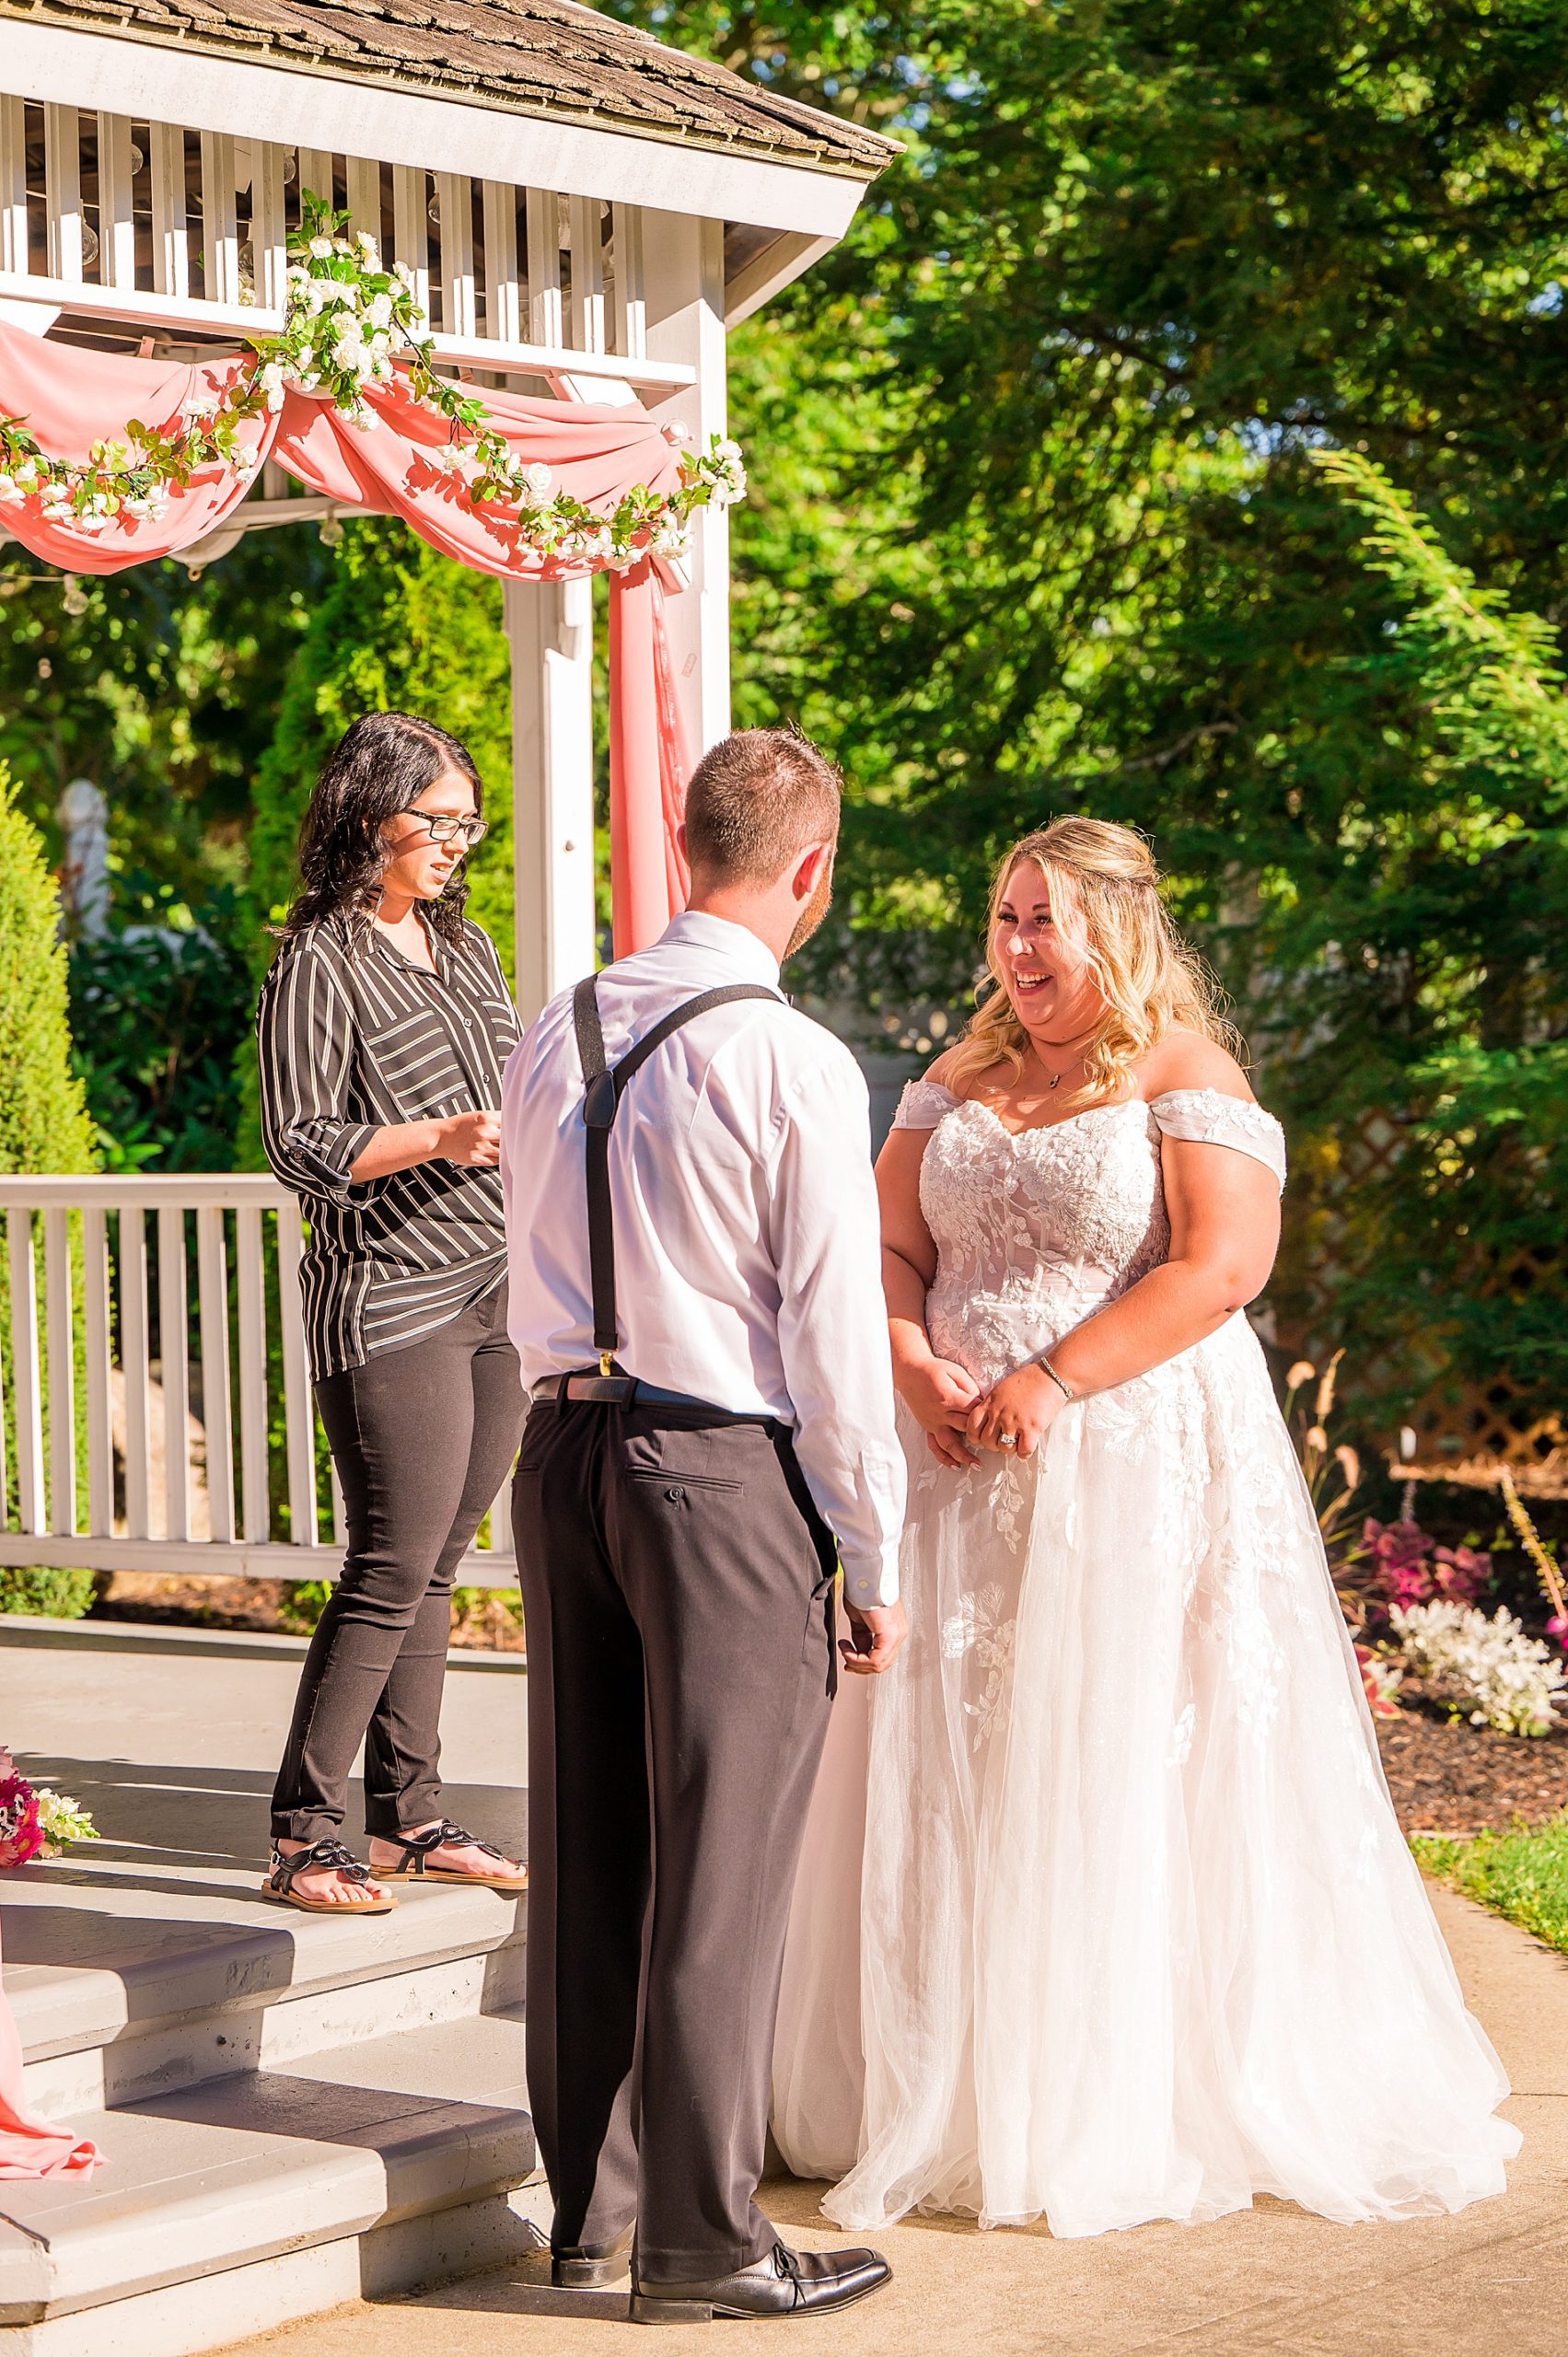 outdoor intimate wedding ceremony in Manchester NH